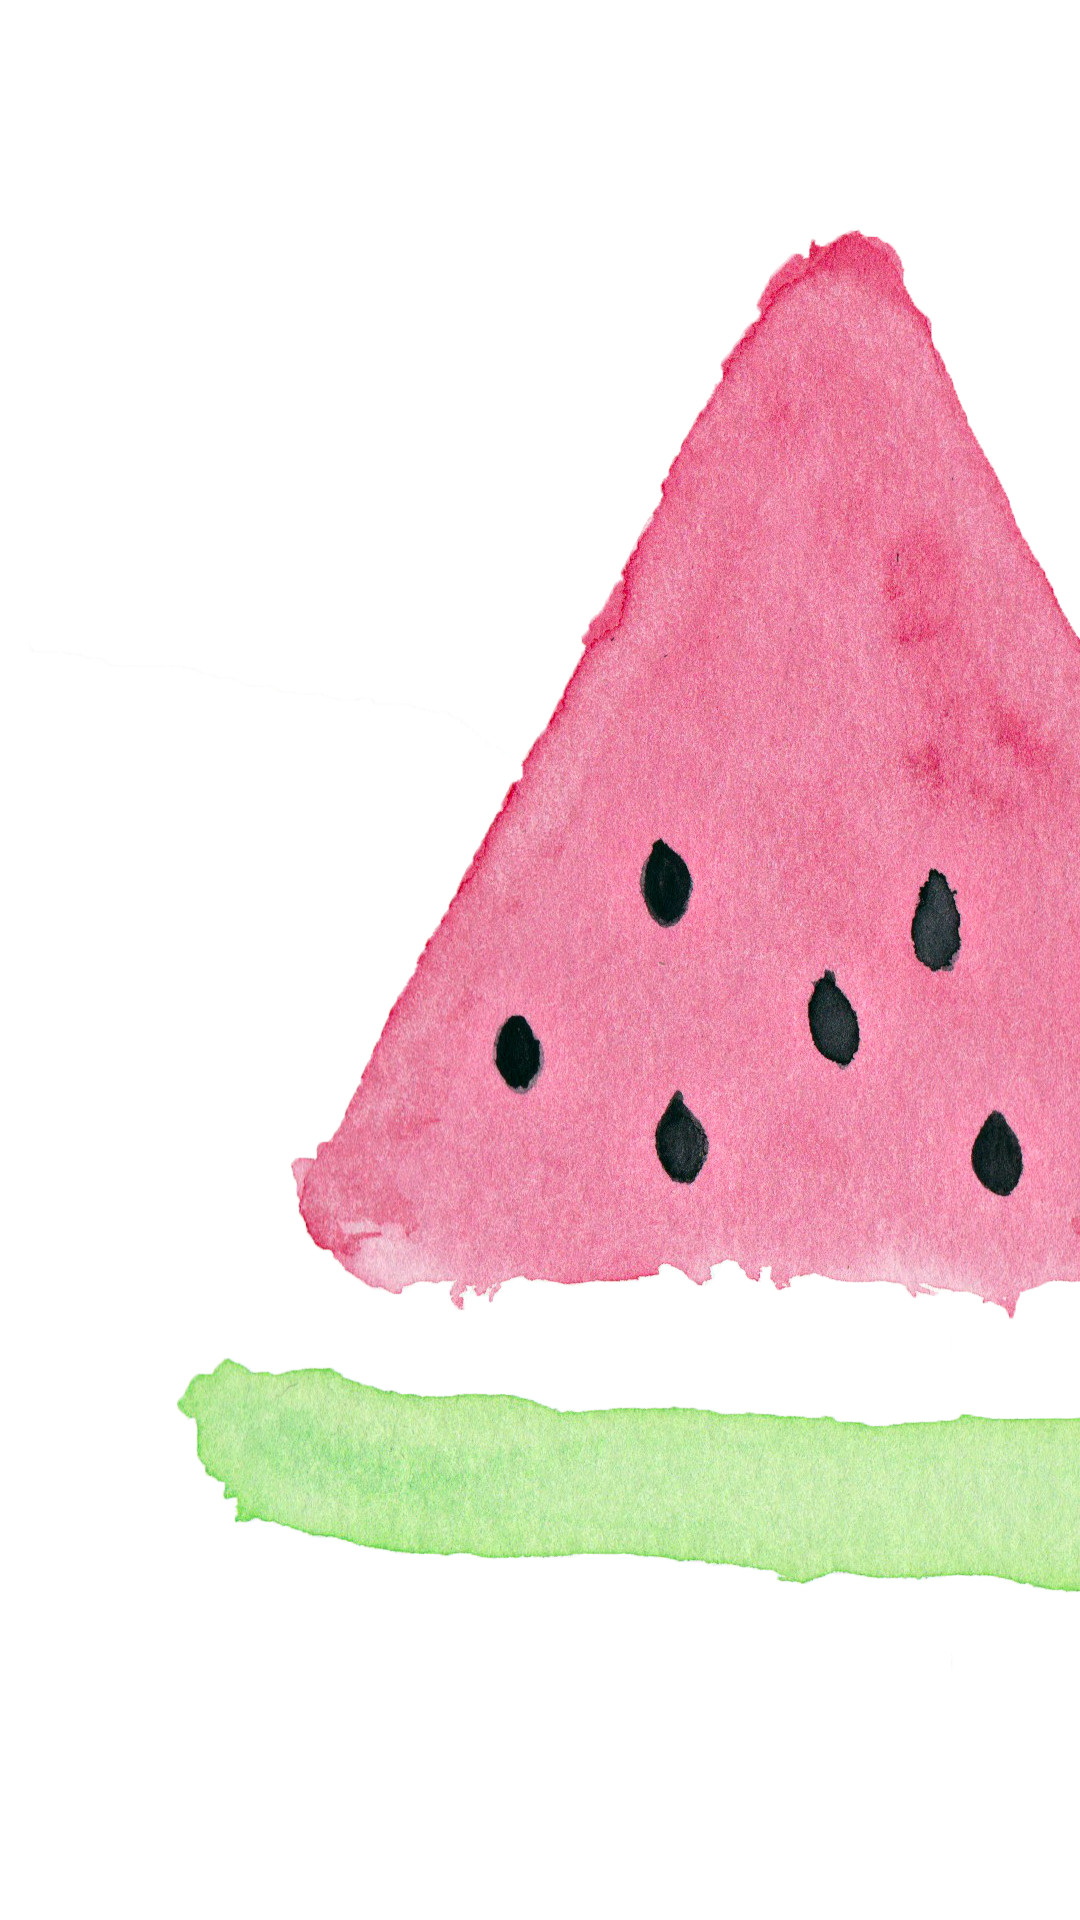 Watermelon Watercolor Find more fruity Android iPhone